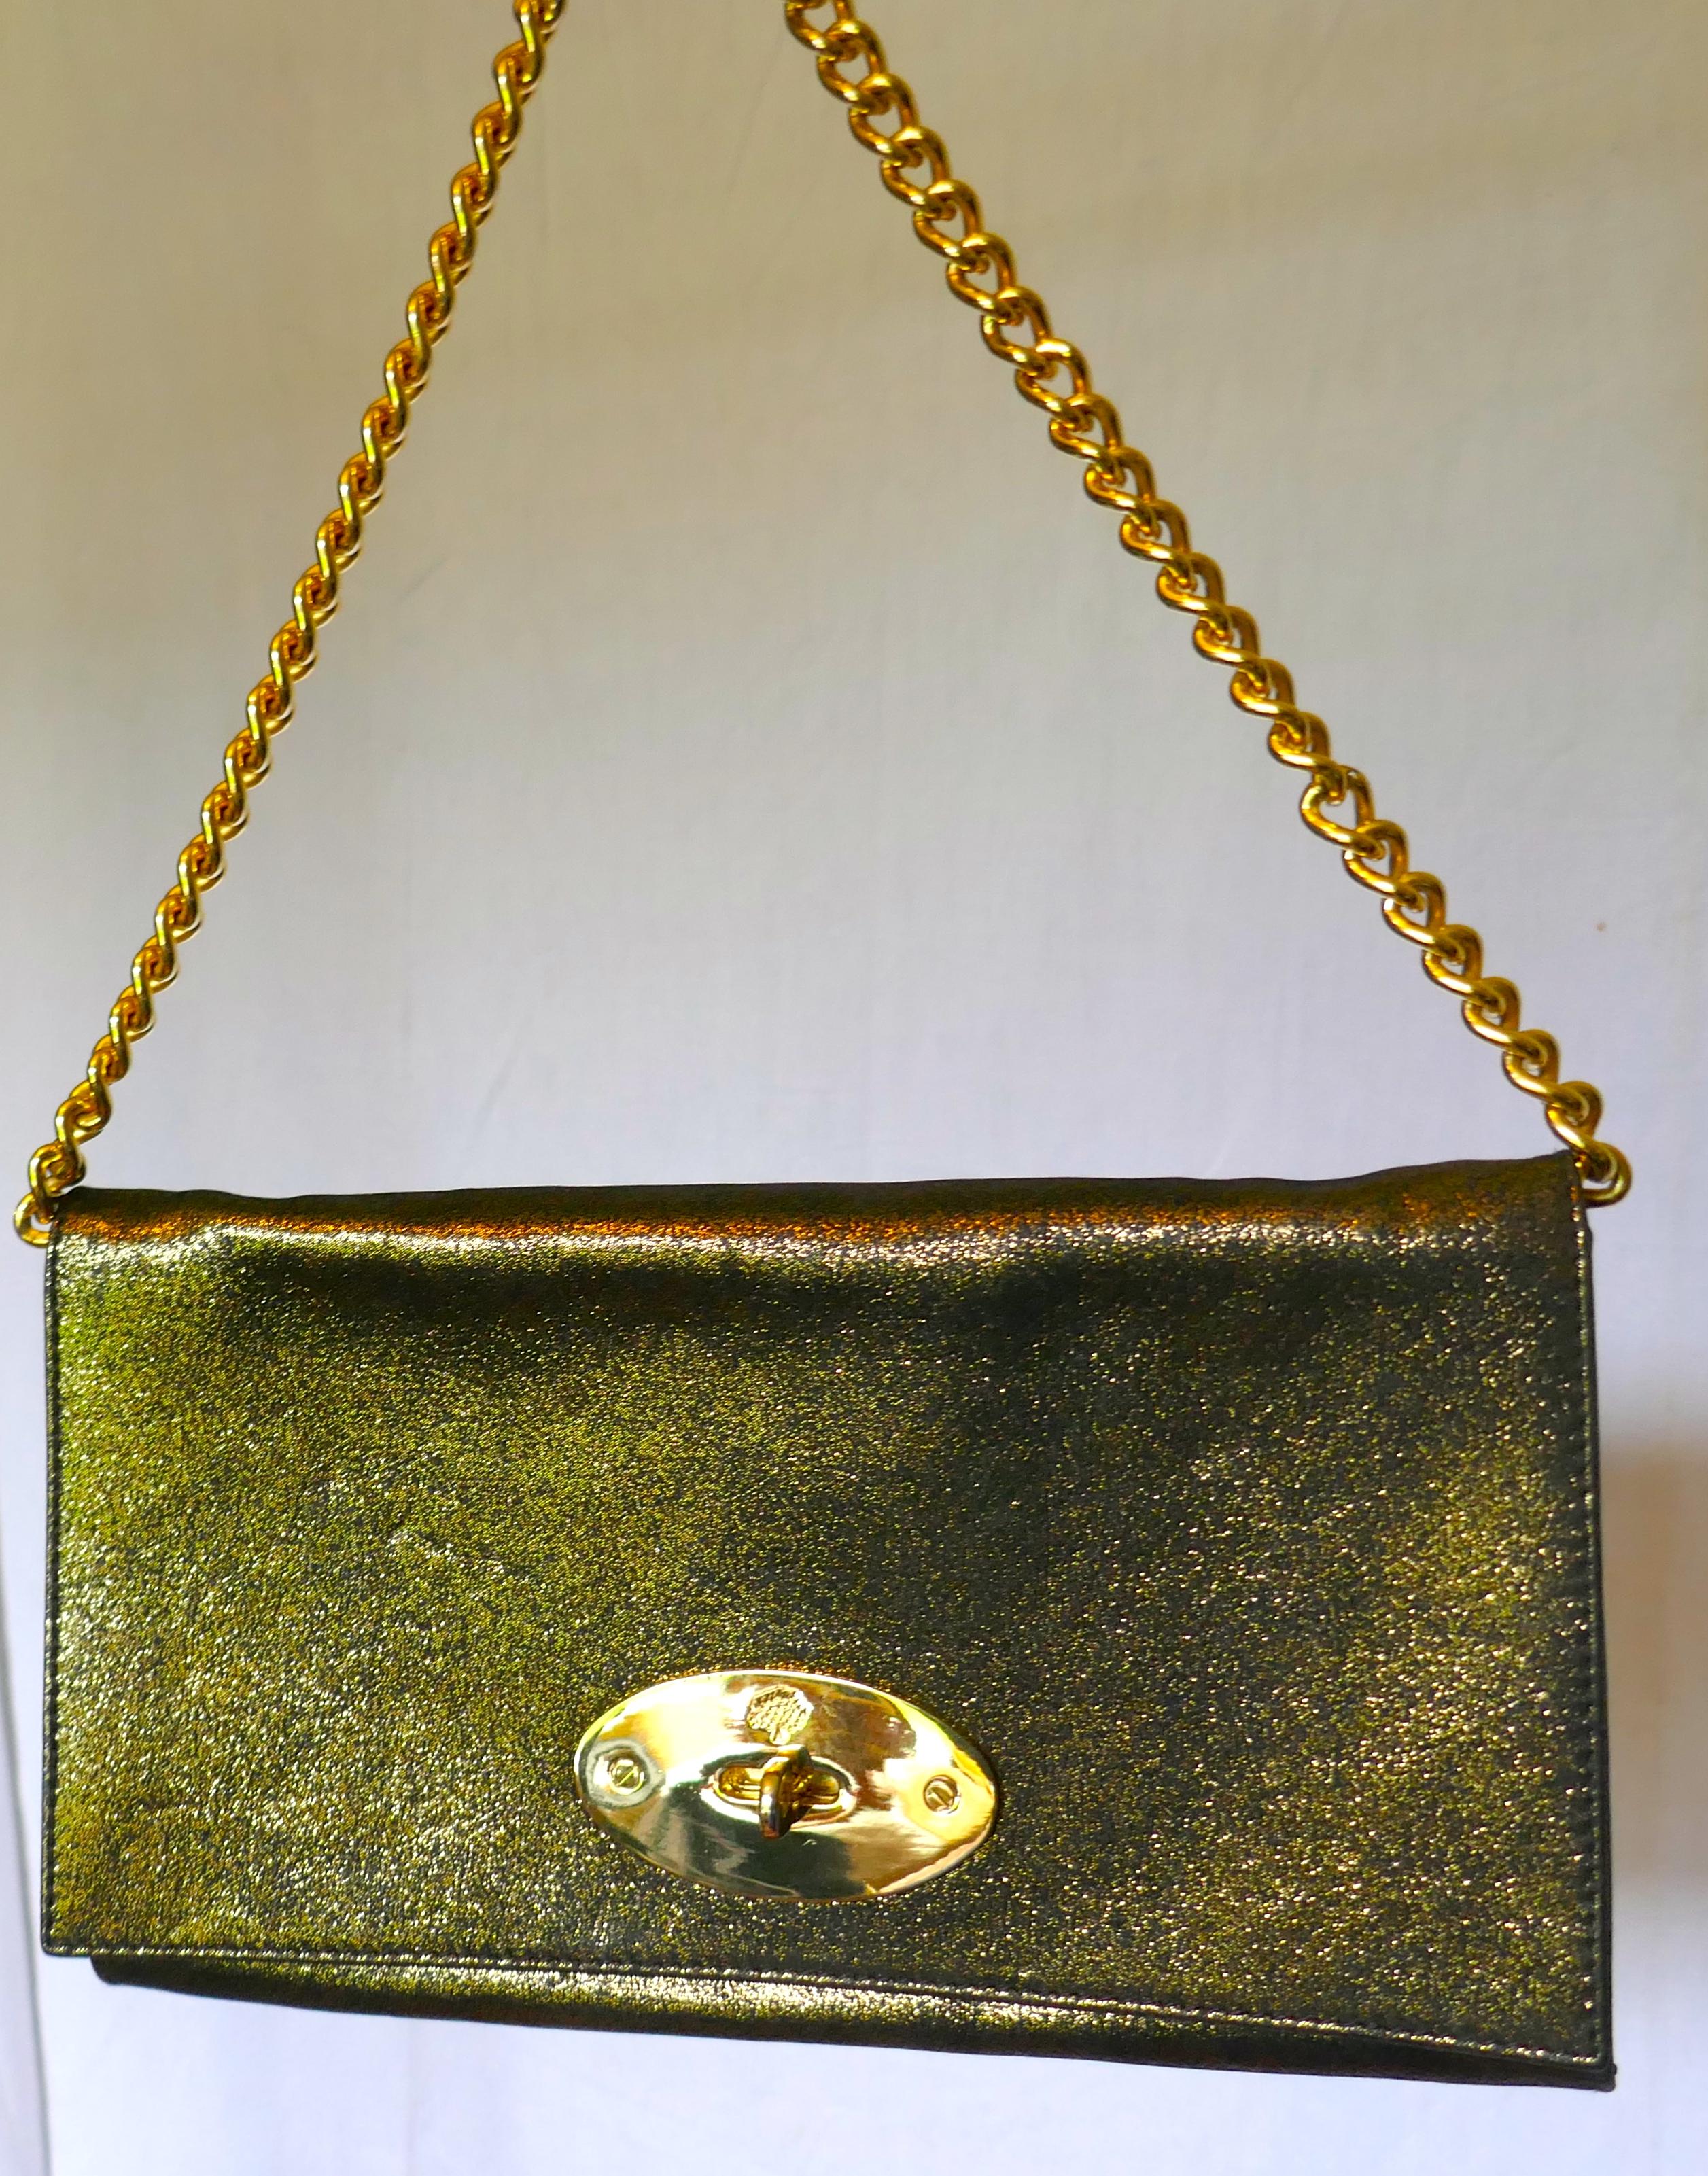 Gold Mulberry Evening Clutch or Chain Handle Bag For Sale 5